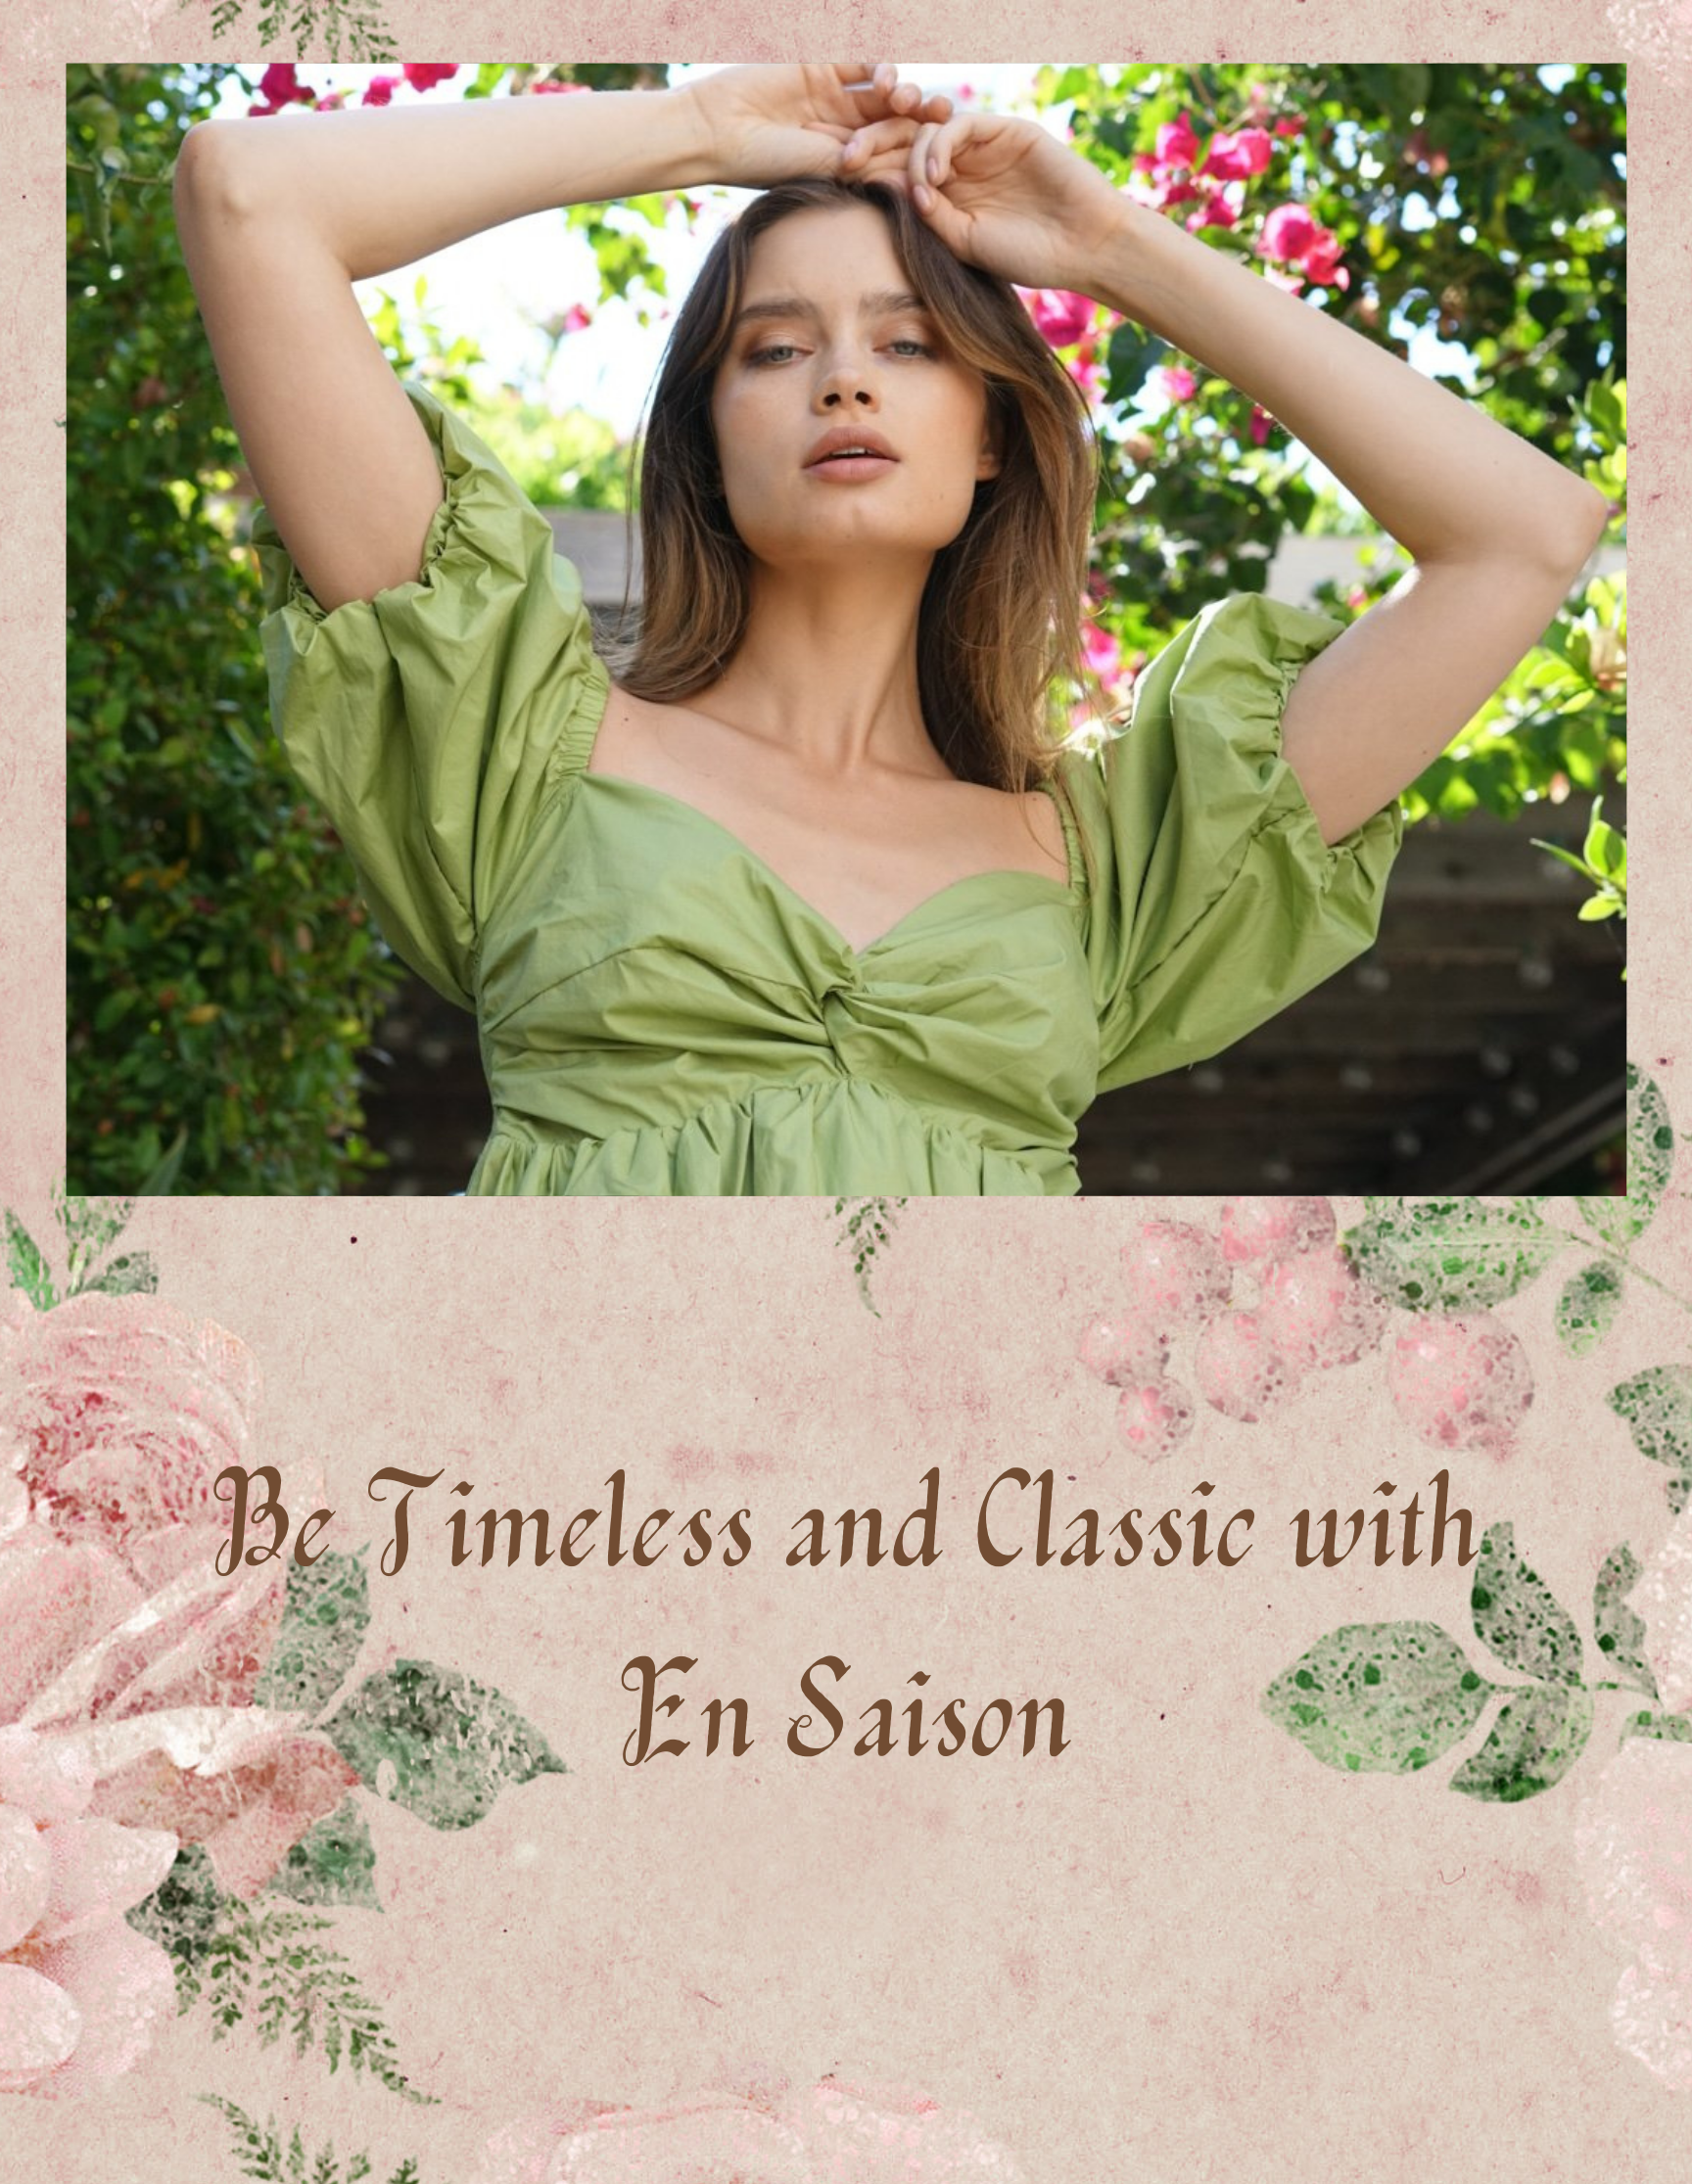 TIME STOPES WITH EN SAISON: BE TIMELSS AND CLASSIC EVERY SEASON